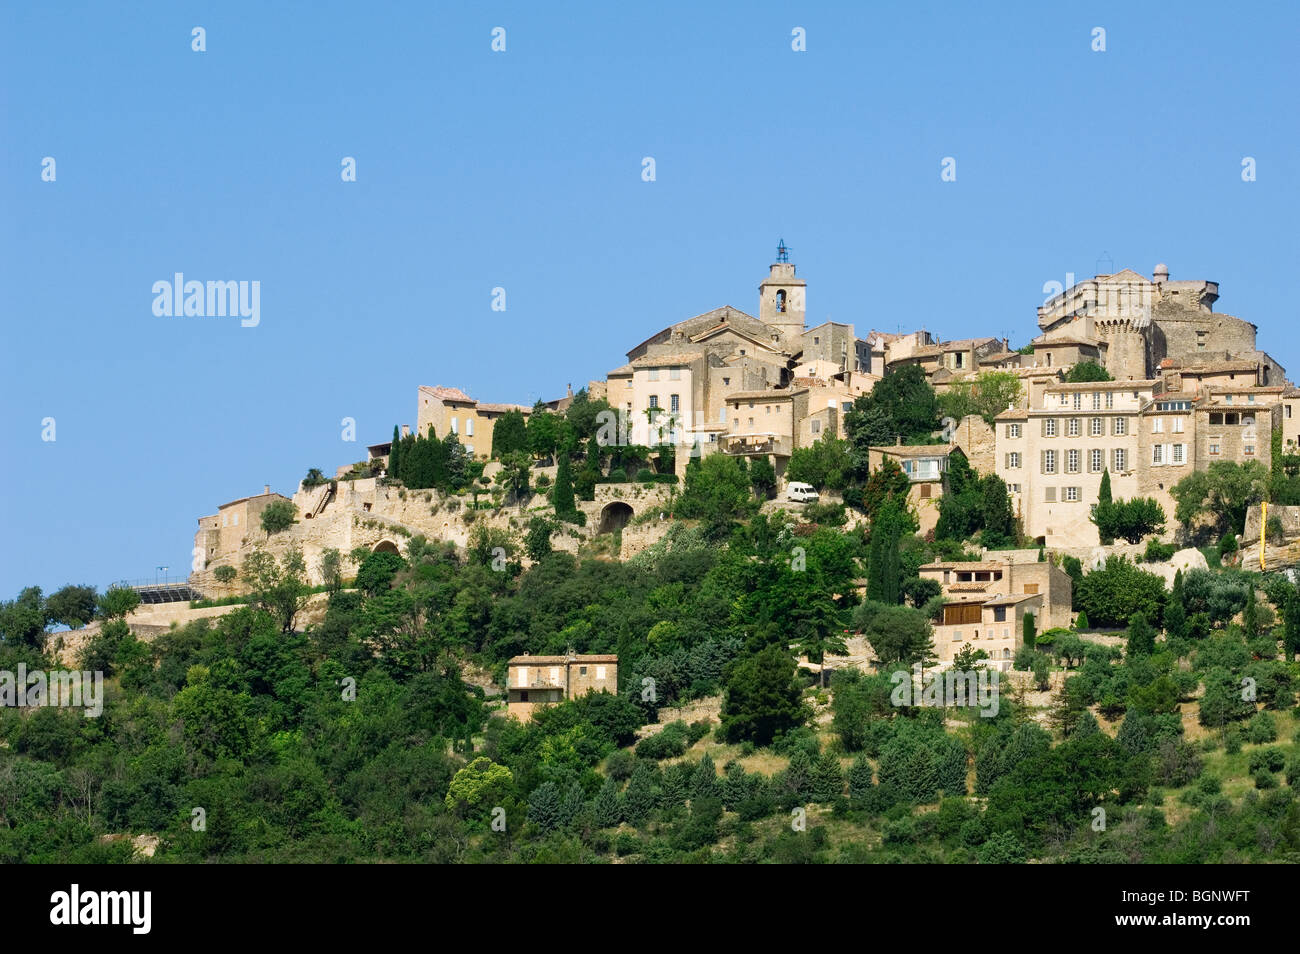 The village Gordes in the Luberon mountains of the Vaucluse, Provence ...